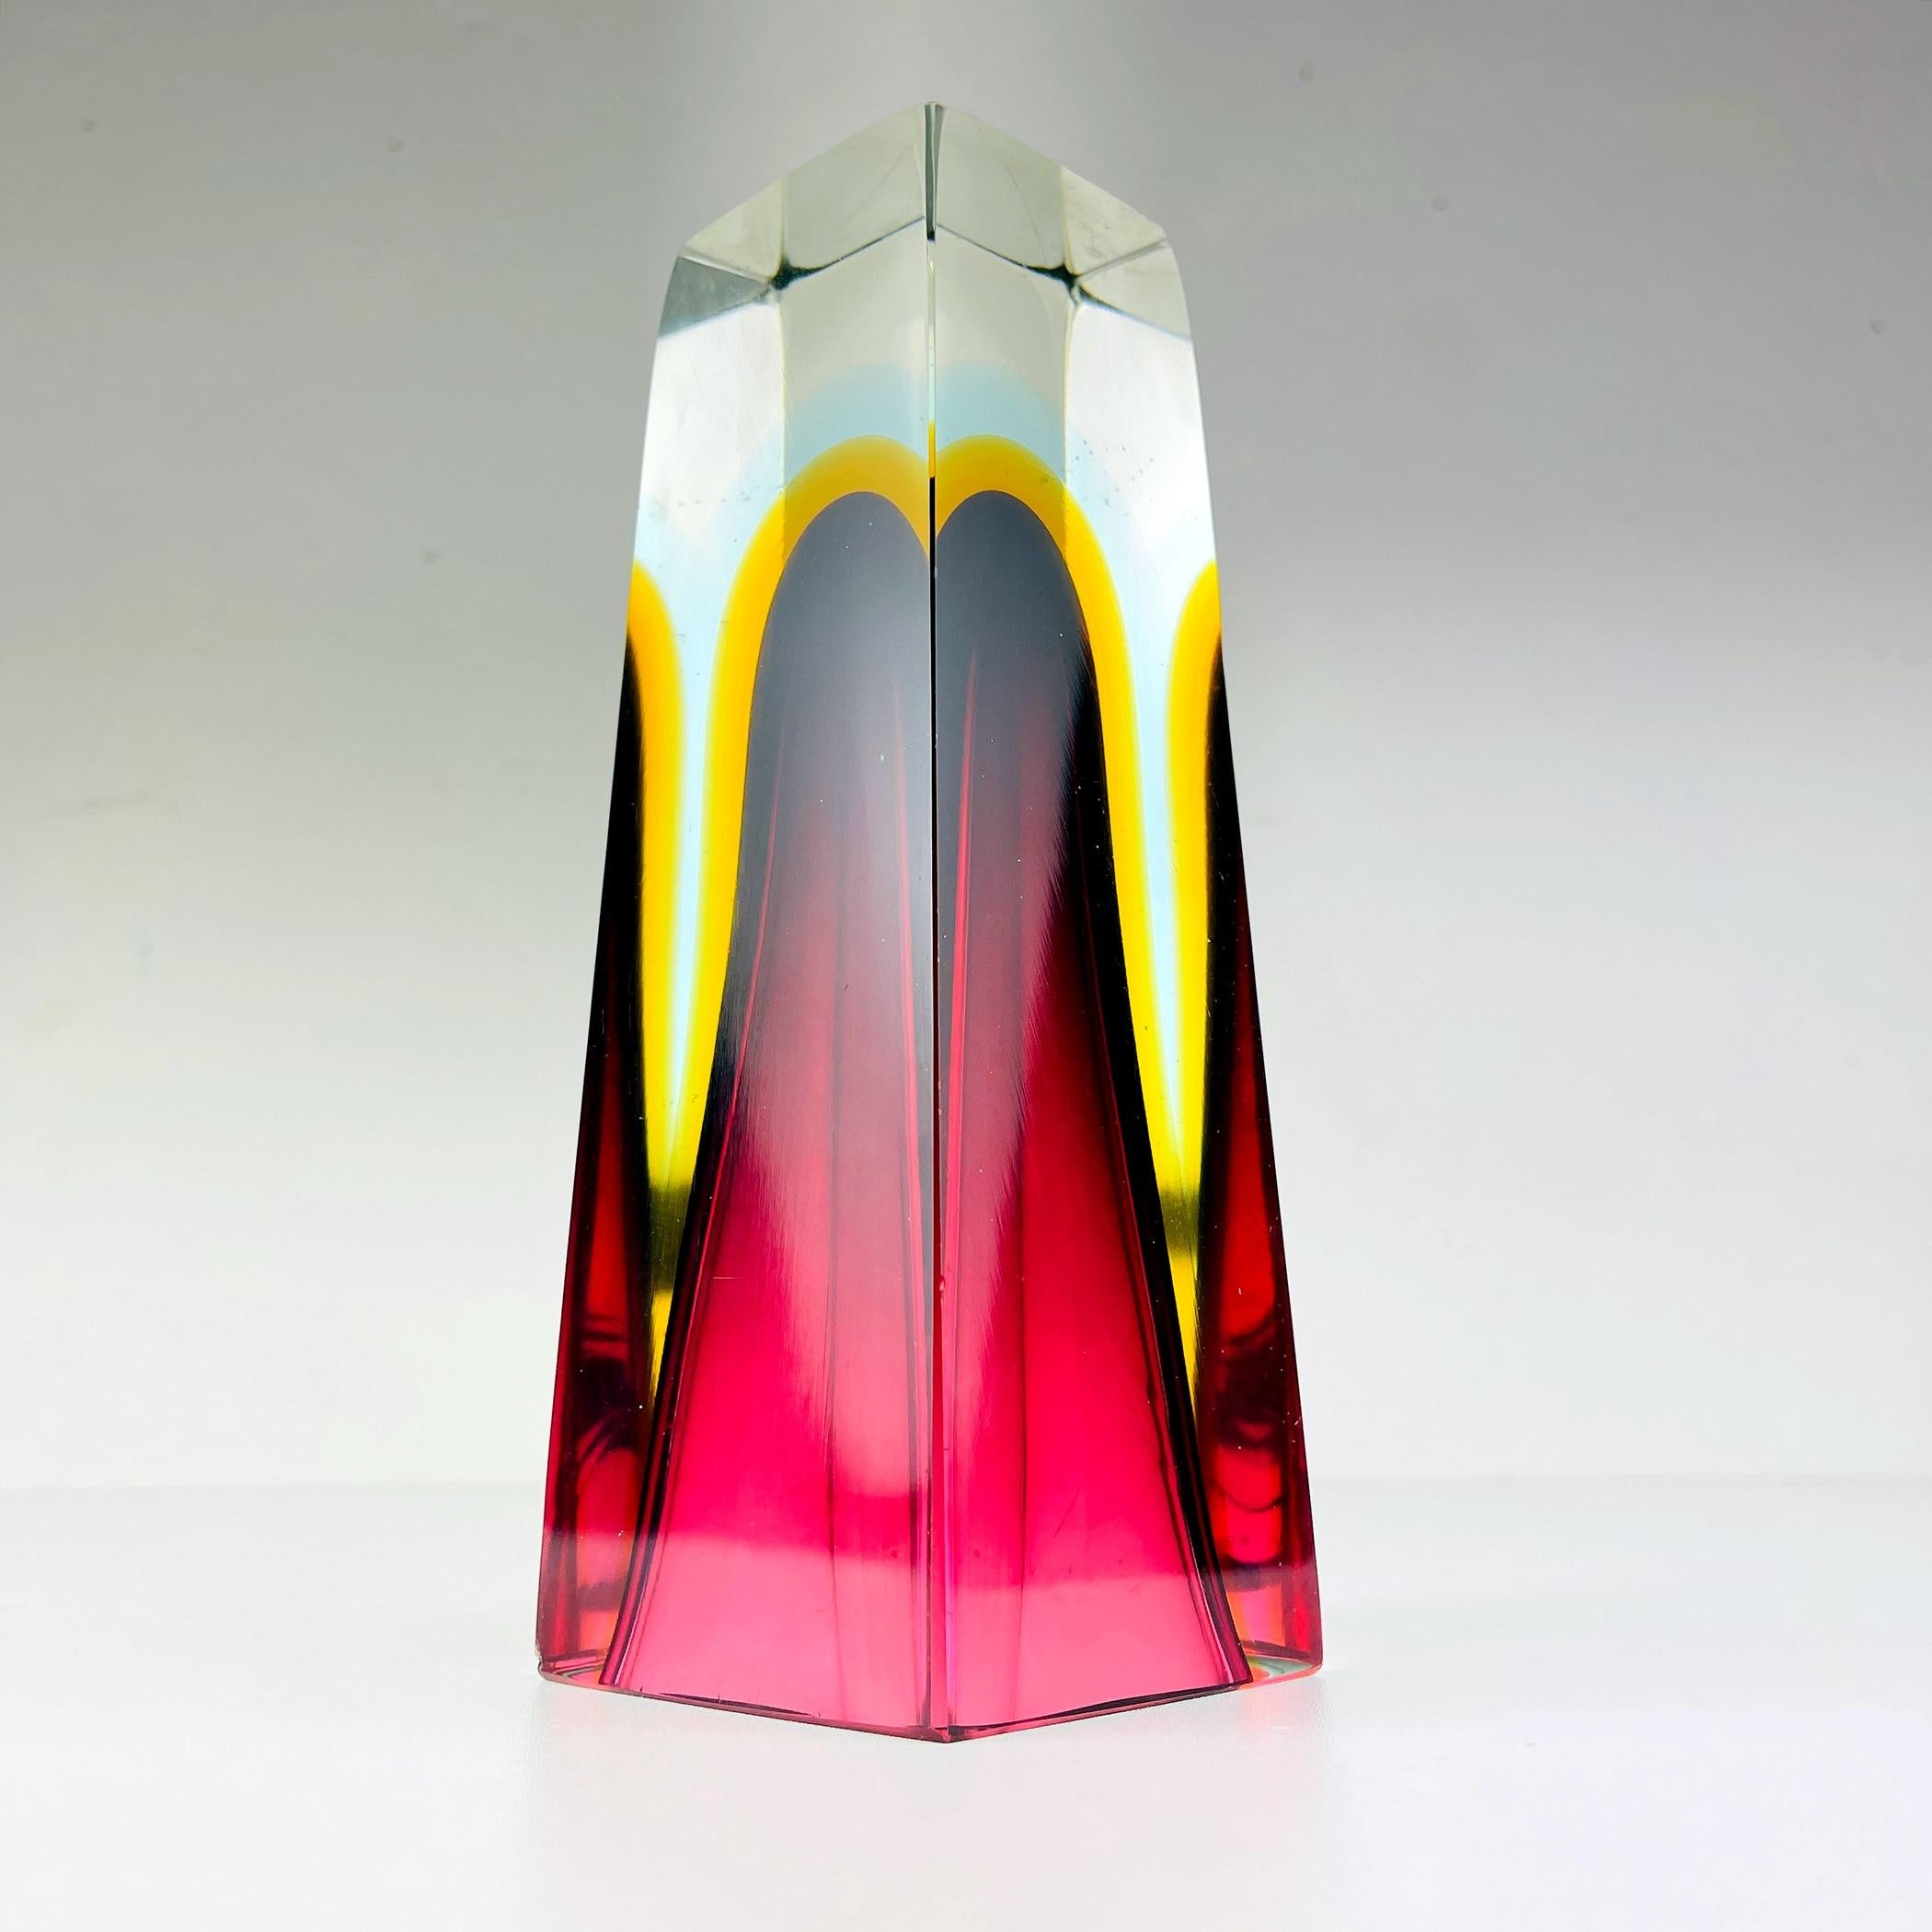 Sommerso Murano Glass Hand-Cut Vases by Alessandro Mandruzzato Italy 1970s For Sale 1